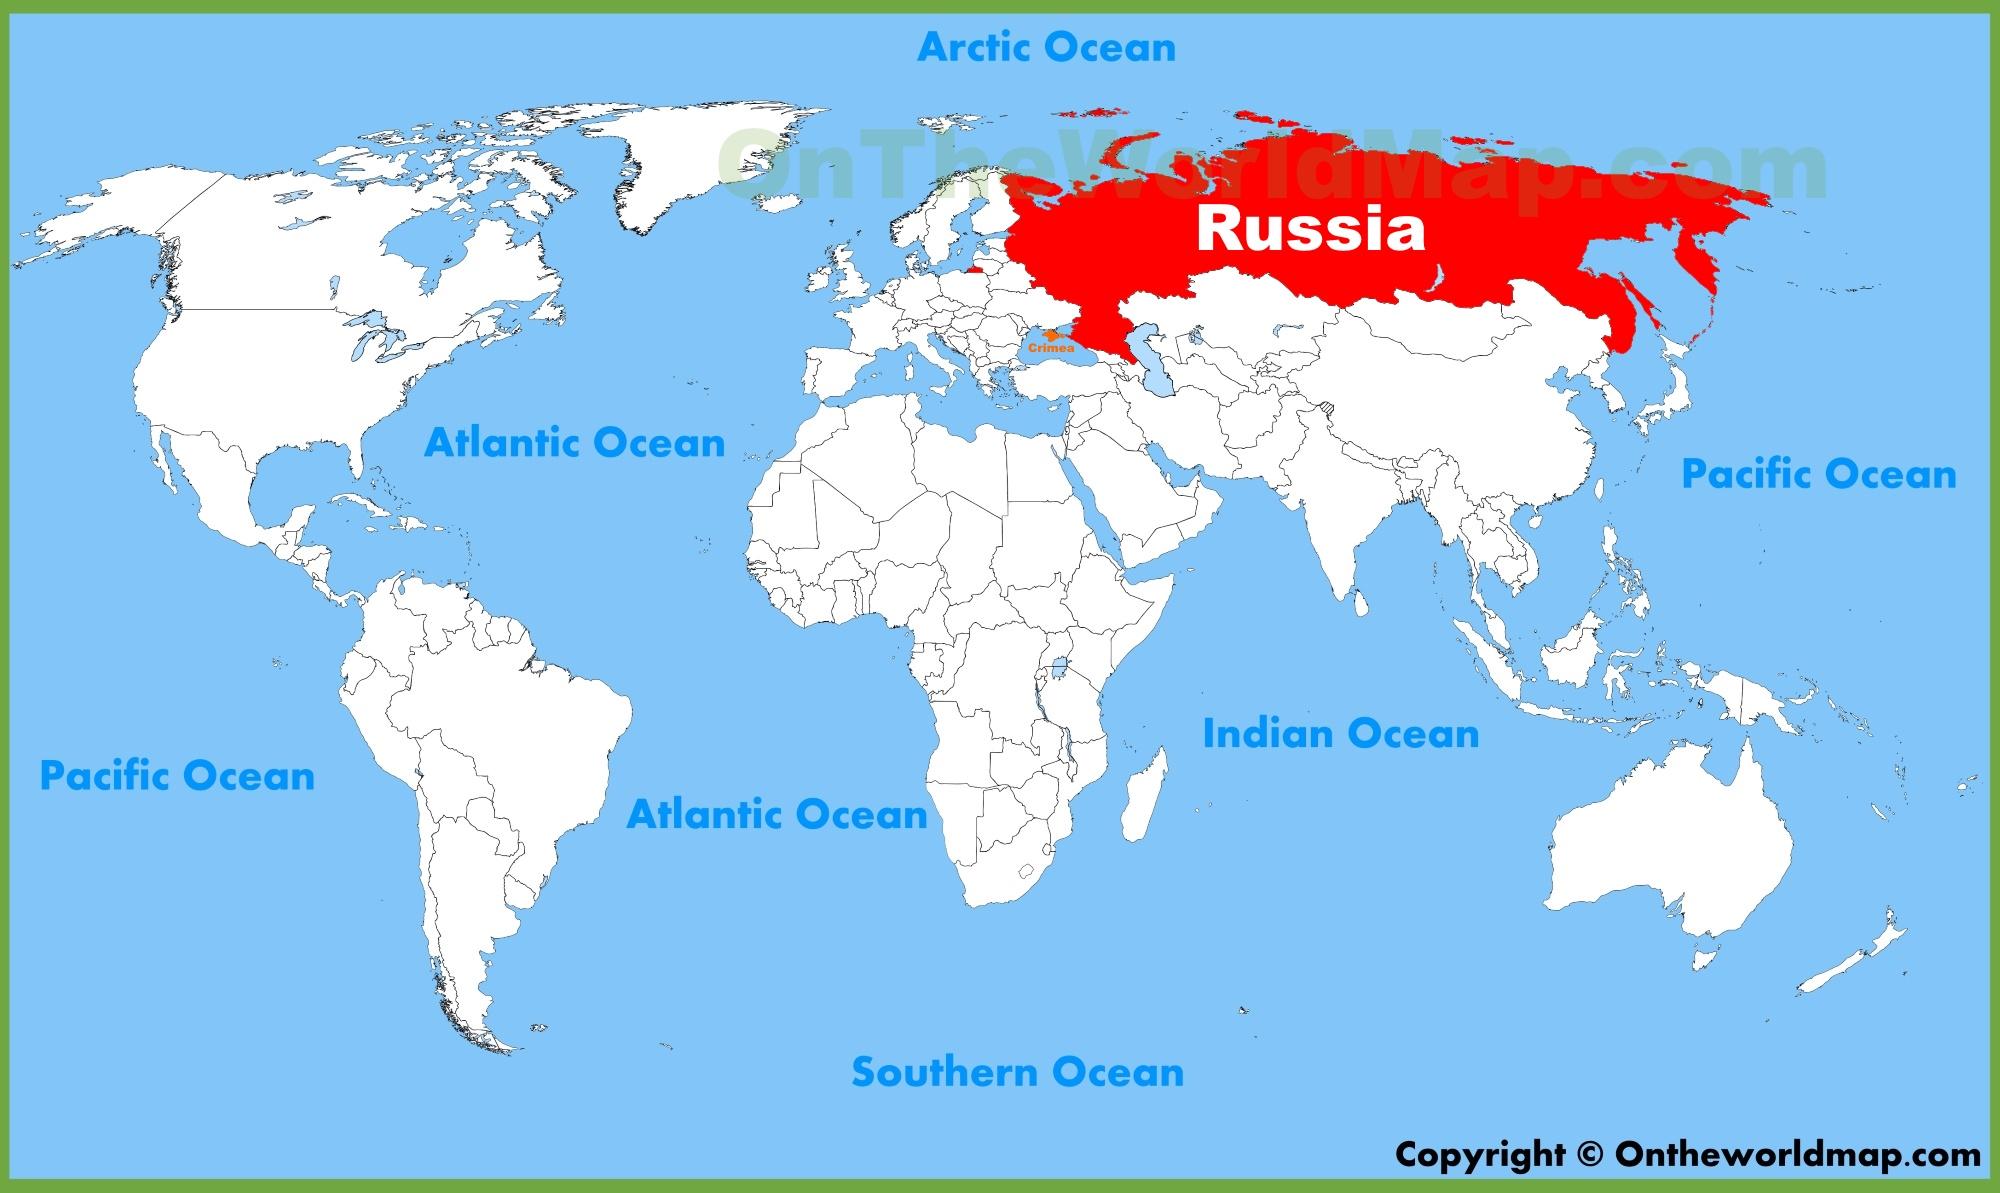 russia-world-map-world-map-of-russia-eastern-europe-europe